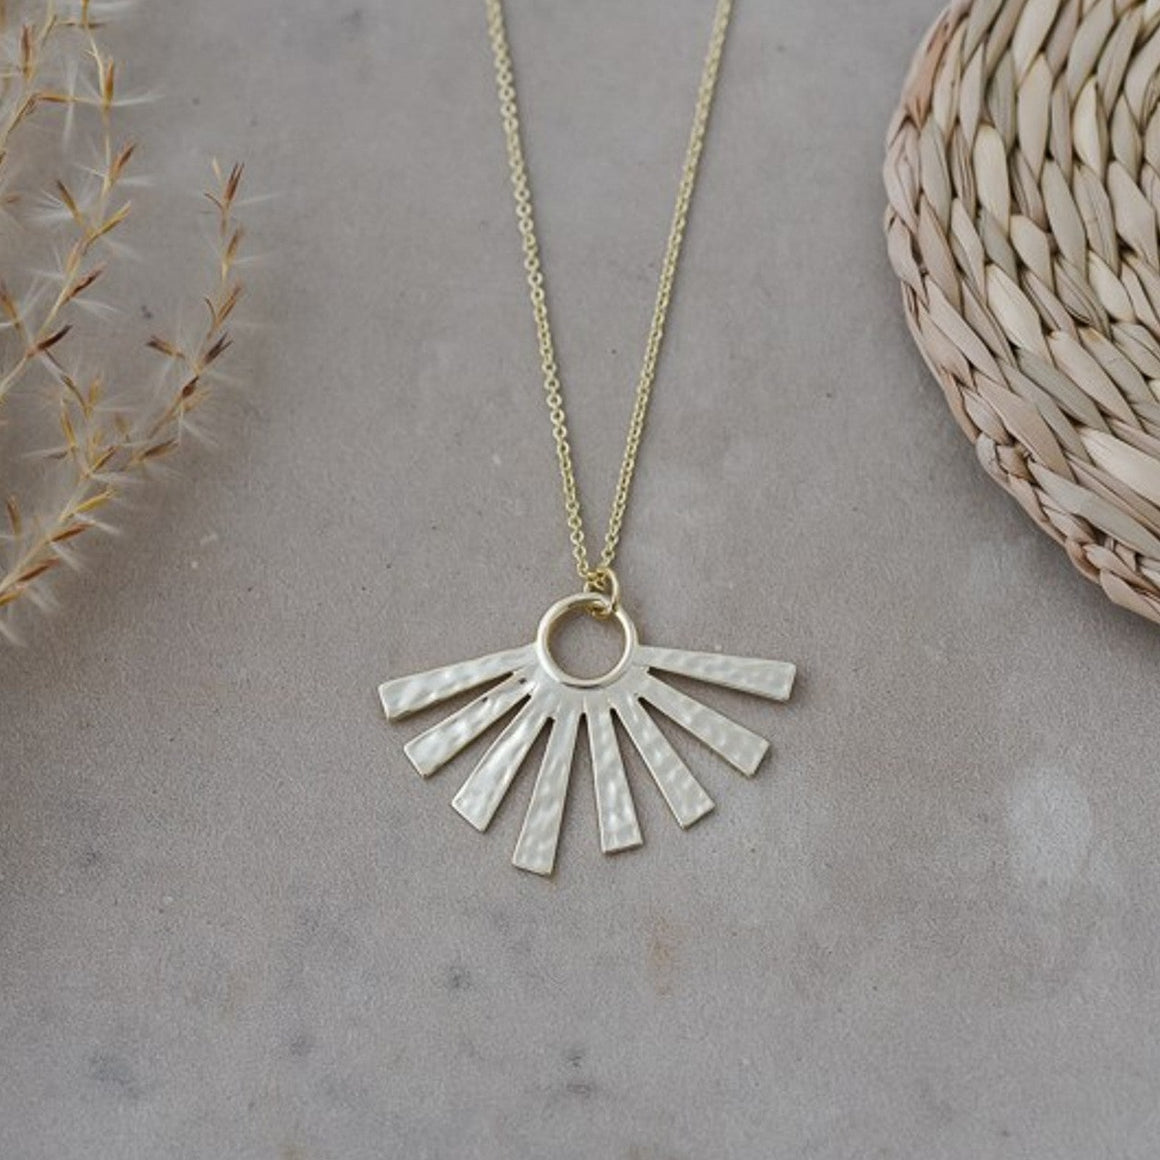 Beaming Brightly Necklace